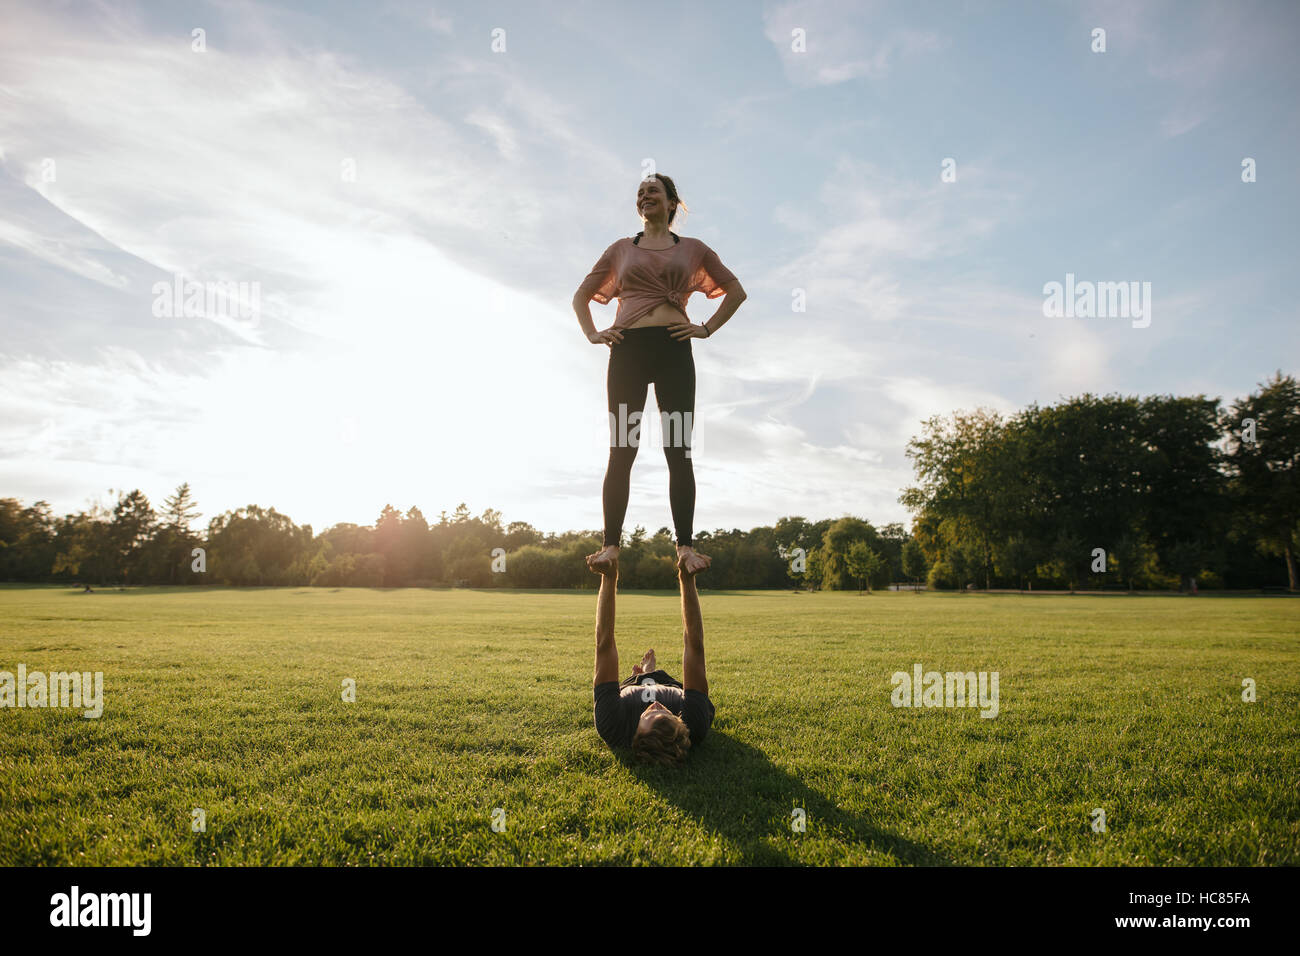 Outdoors shot of young couple doing acrobatic yoga exercise in park. Woman standing on feet of man and balancing. Stock Photo